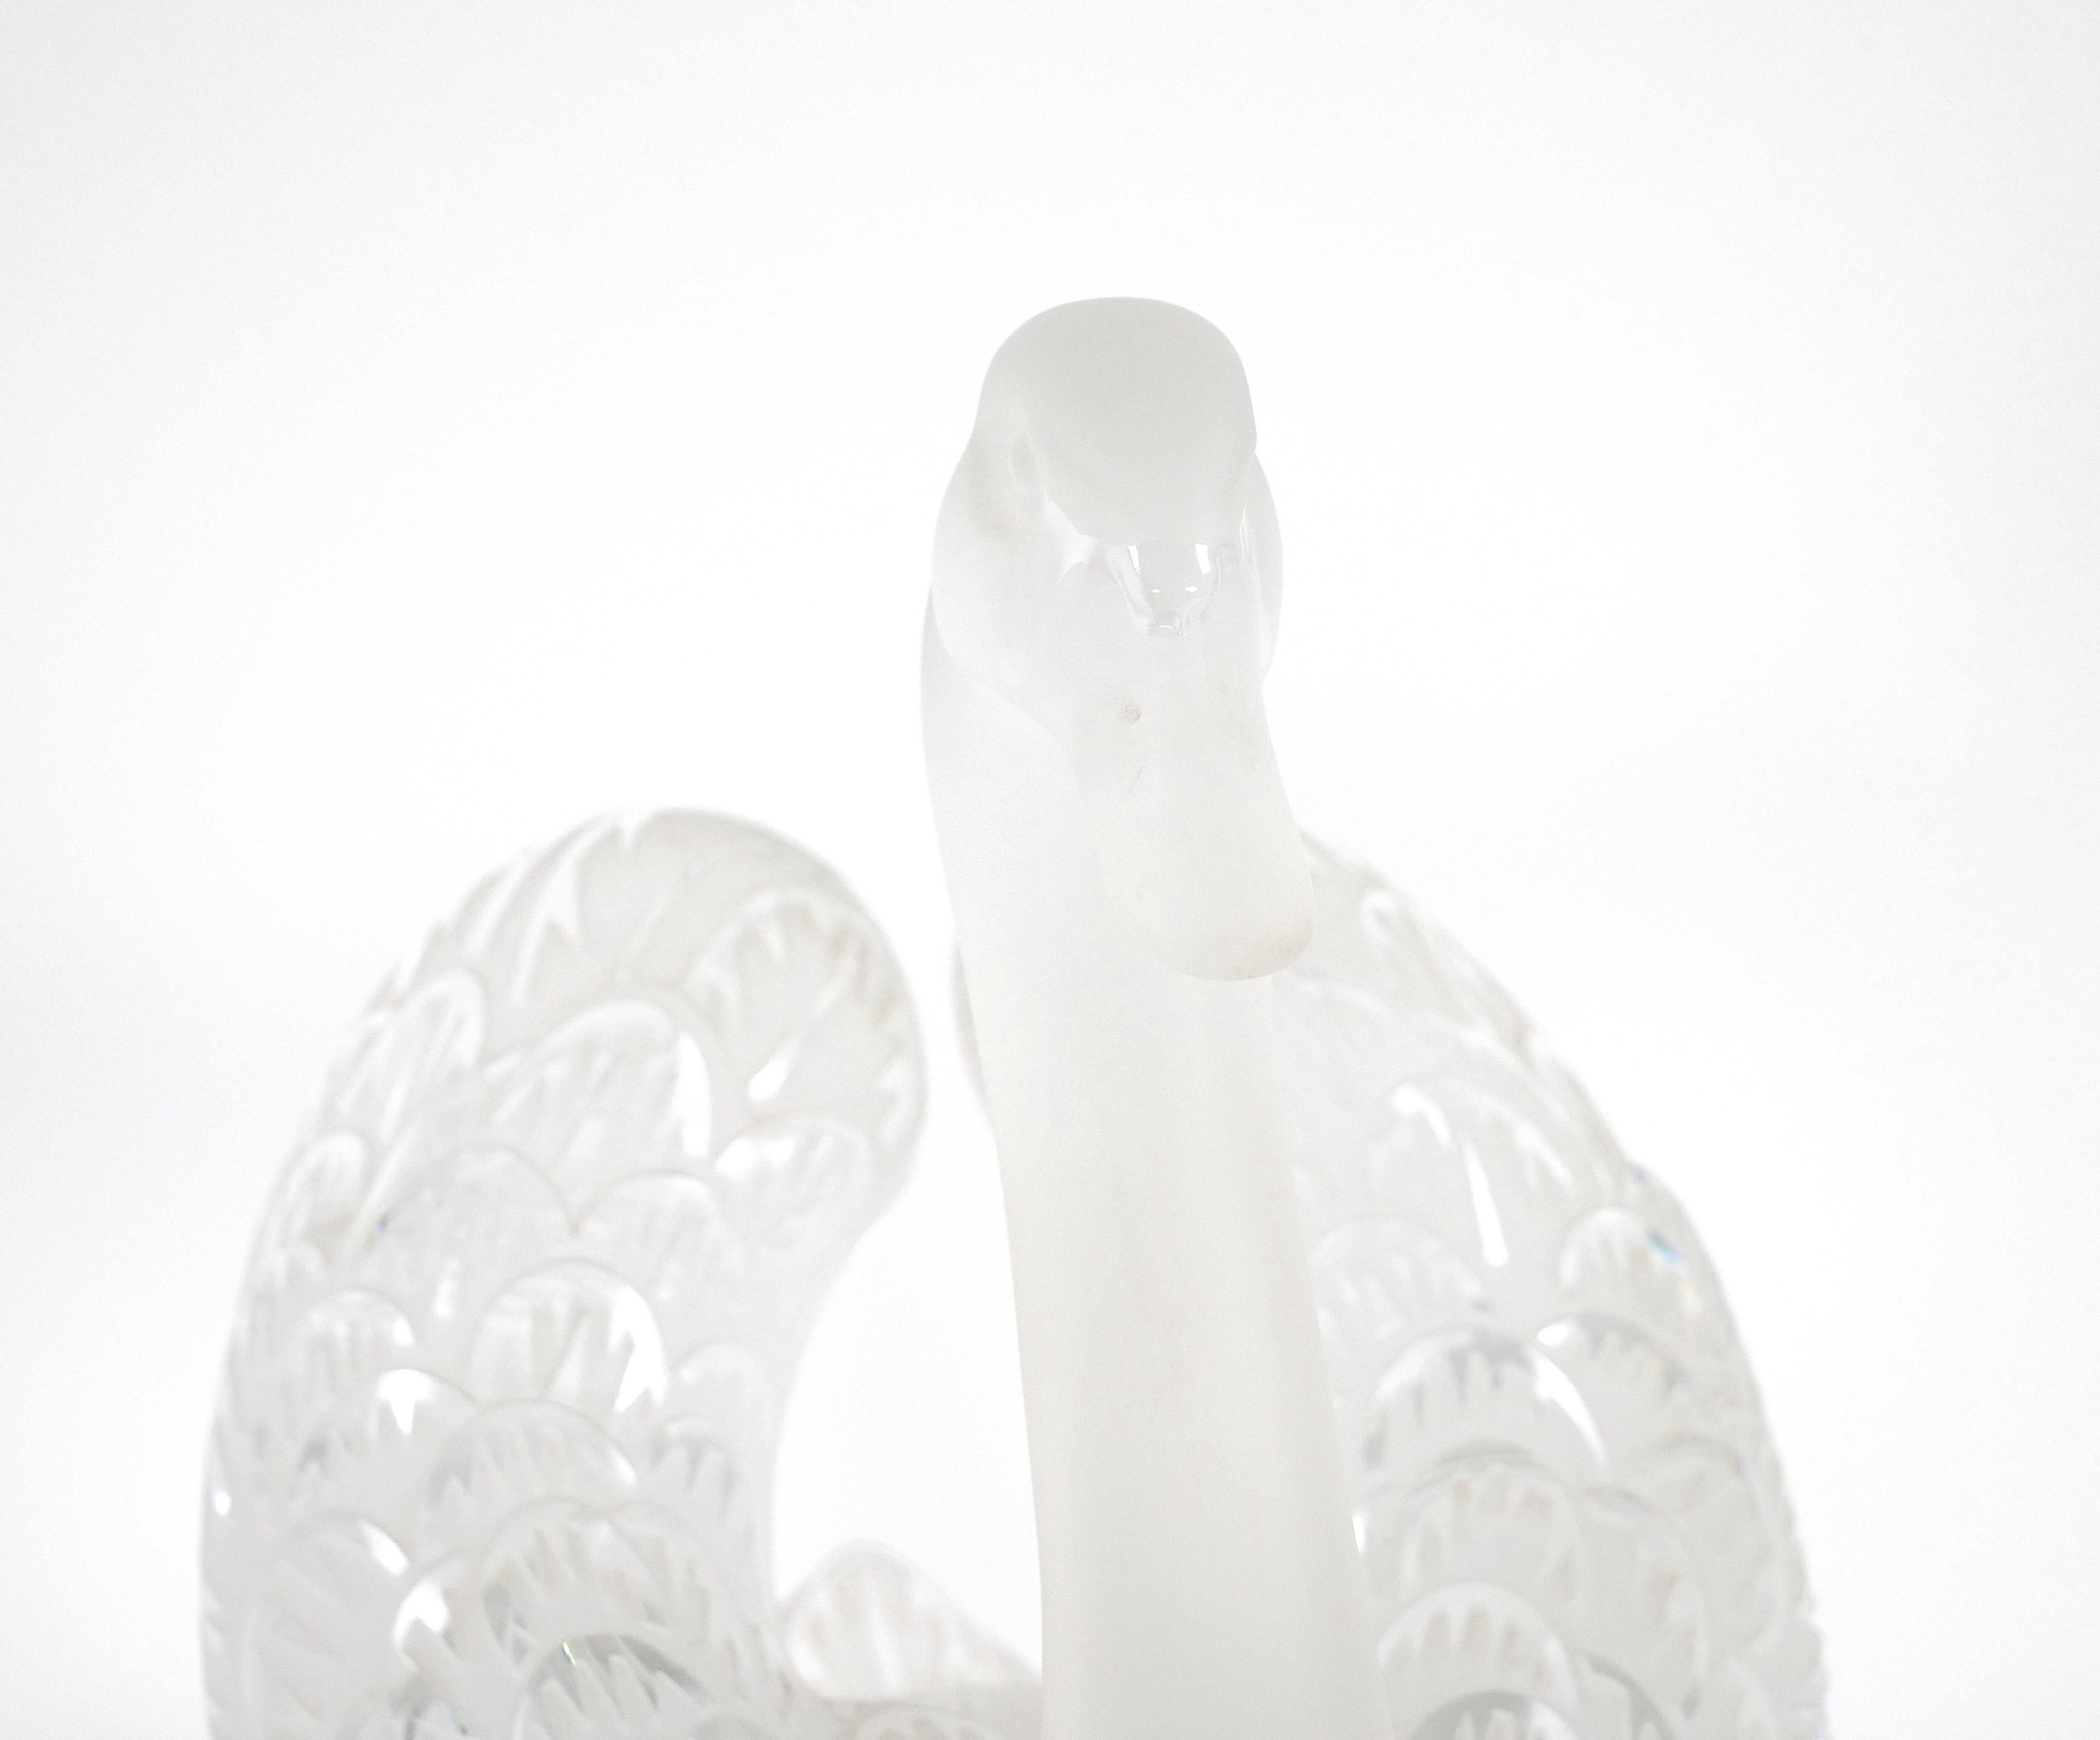  Lalique Crystal Frosted Head Down Swan Sculpture Resting On Mirrored Plateau en vente 6